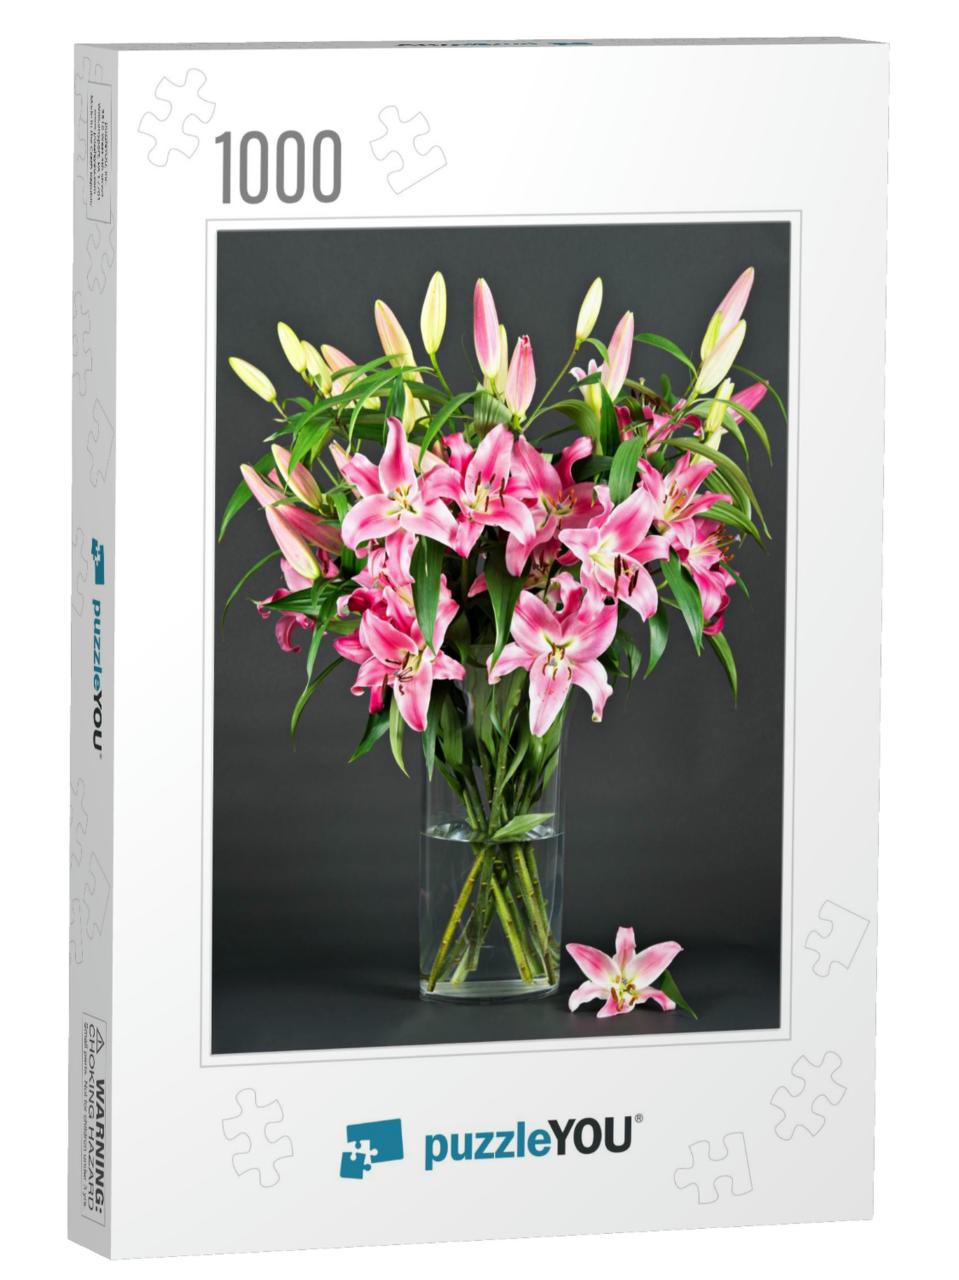 Pink Lily Flowers on Black Background... Jigsaw Puzzle with 1000 pieces